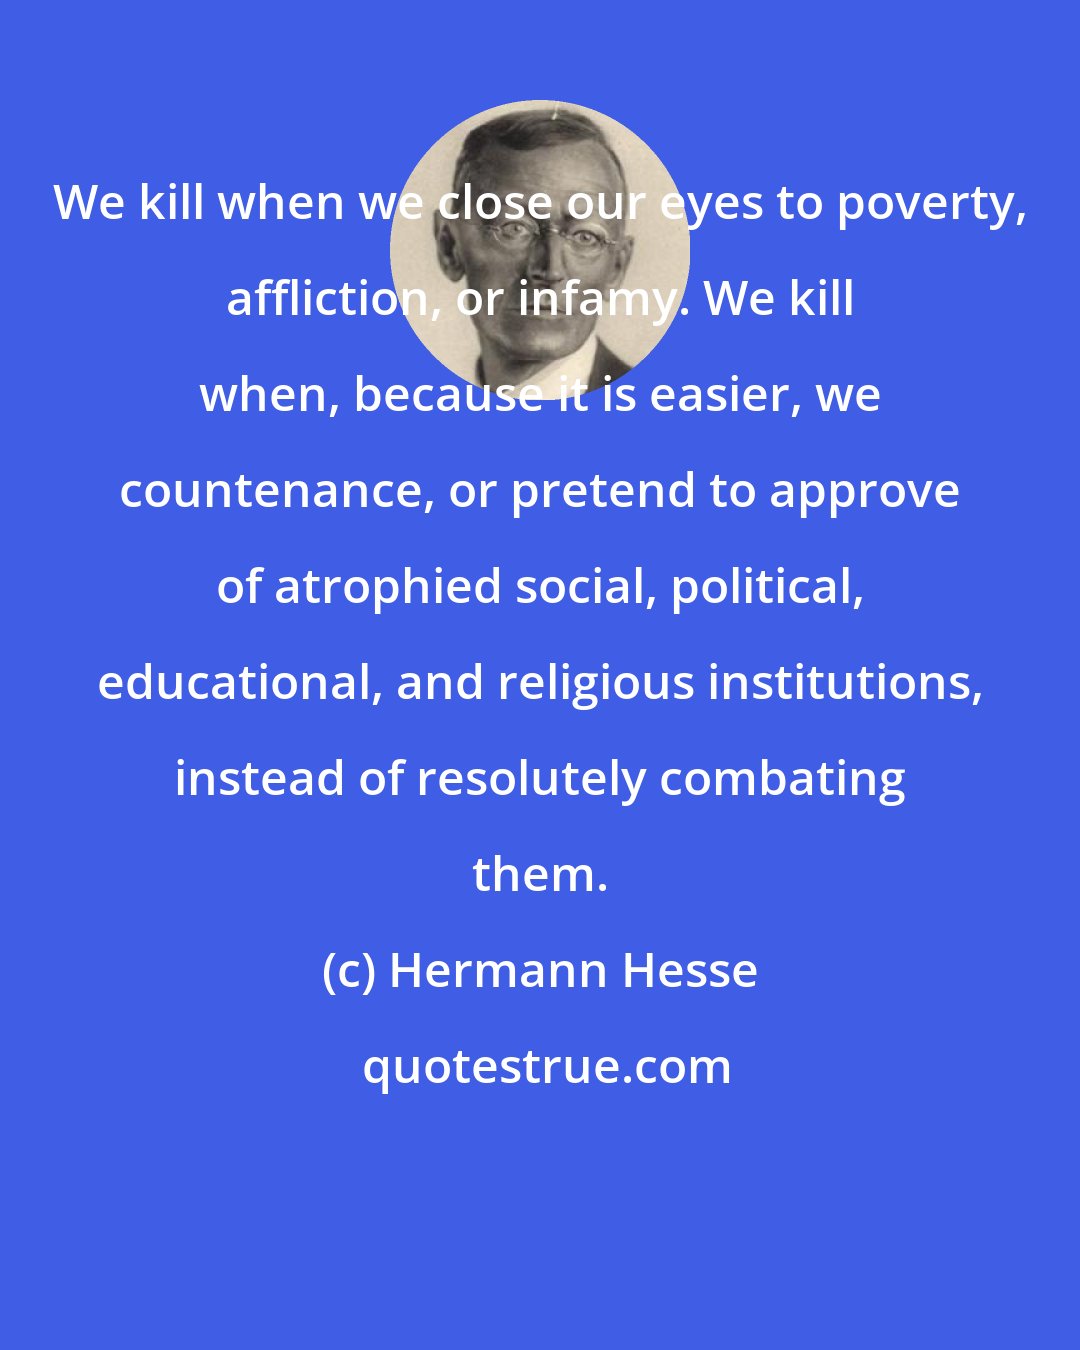 Hermann Hesse: We kill when we close our eyes to poverty, affliction, or infamy. We kill when, because it is easier, we countenance, or pretend to approve of atrophied social, political, educational, and religious institutions, instead of resolutely combating them.